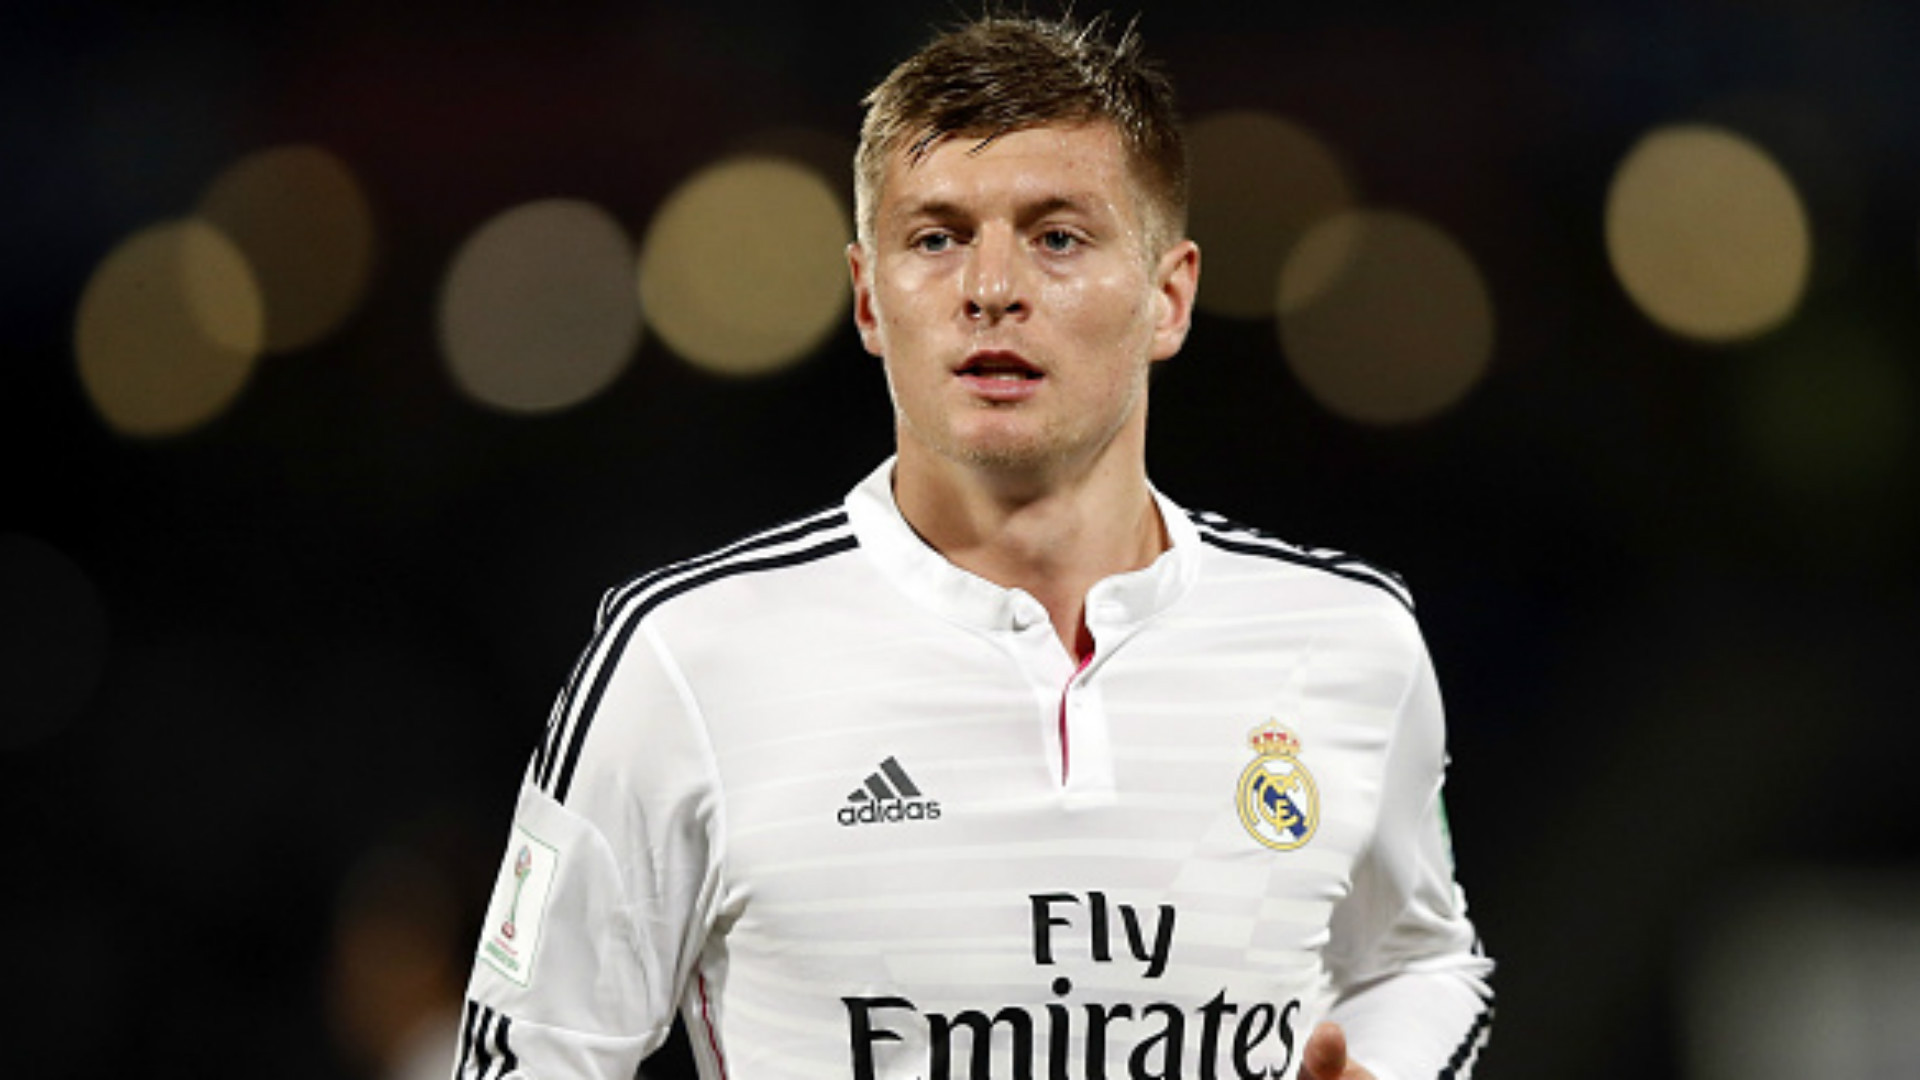 Toni Kroos has attracted the interest of Manchester United